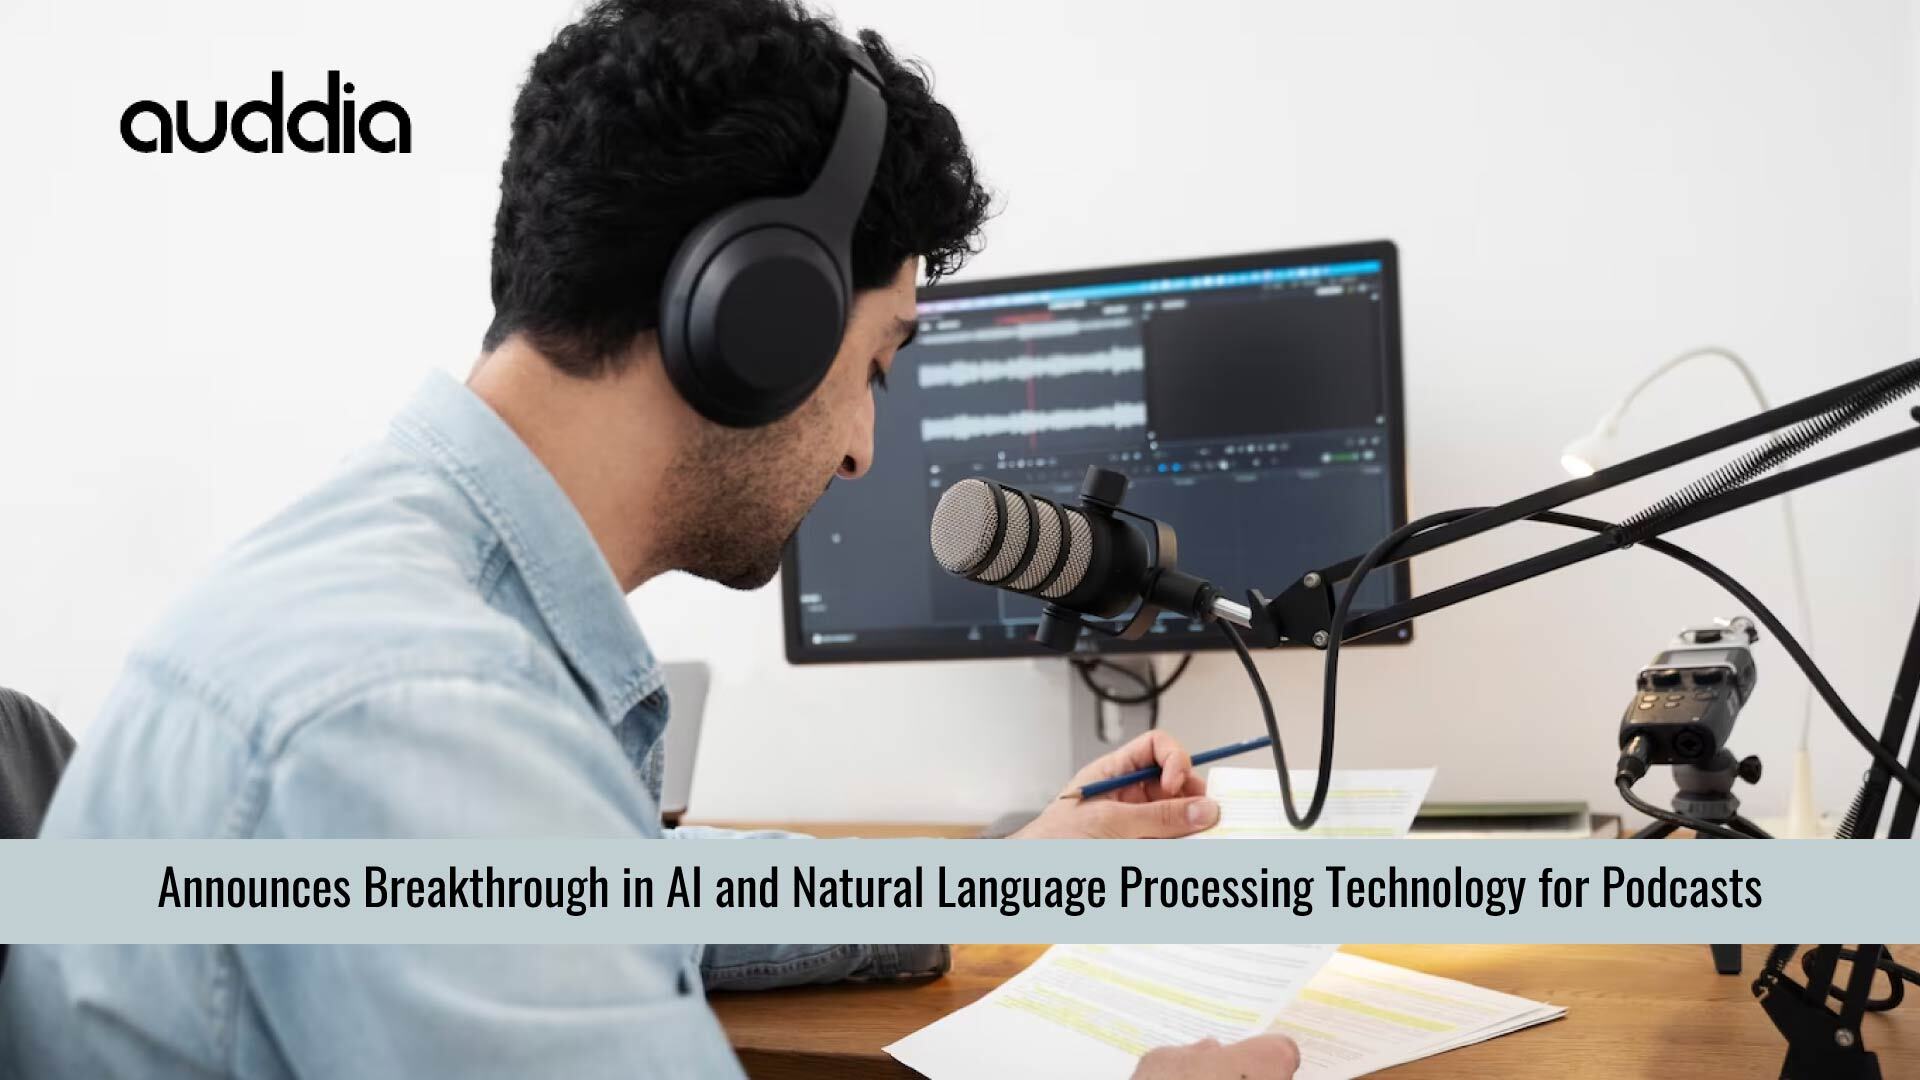 Auddia Announces Breakthrough in AI and Natural Language Processing Technology for Podcasts